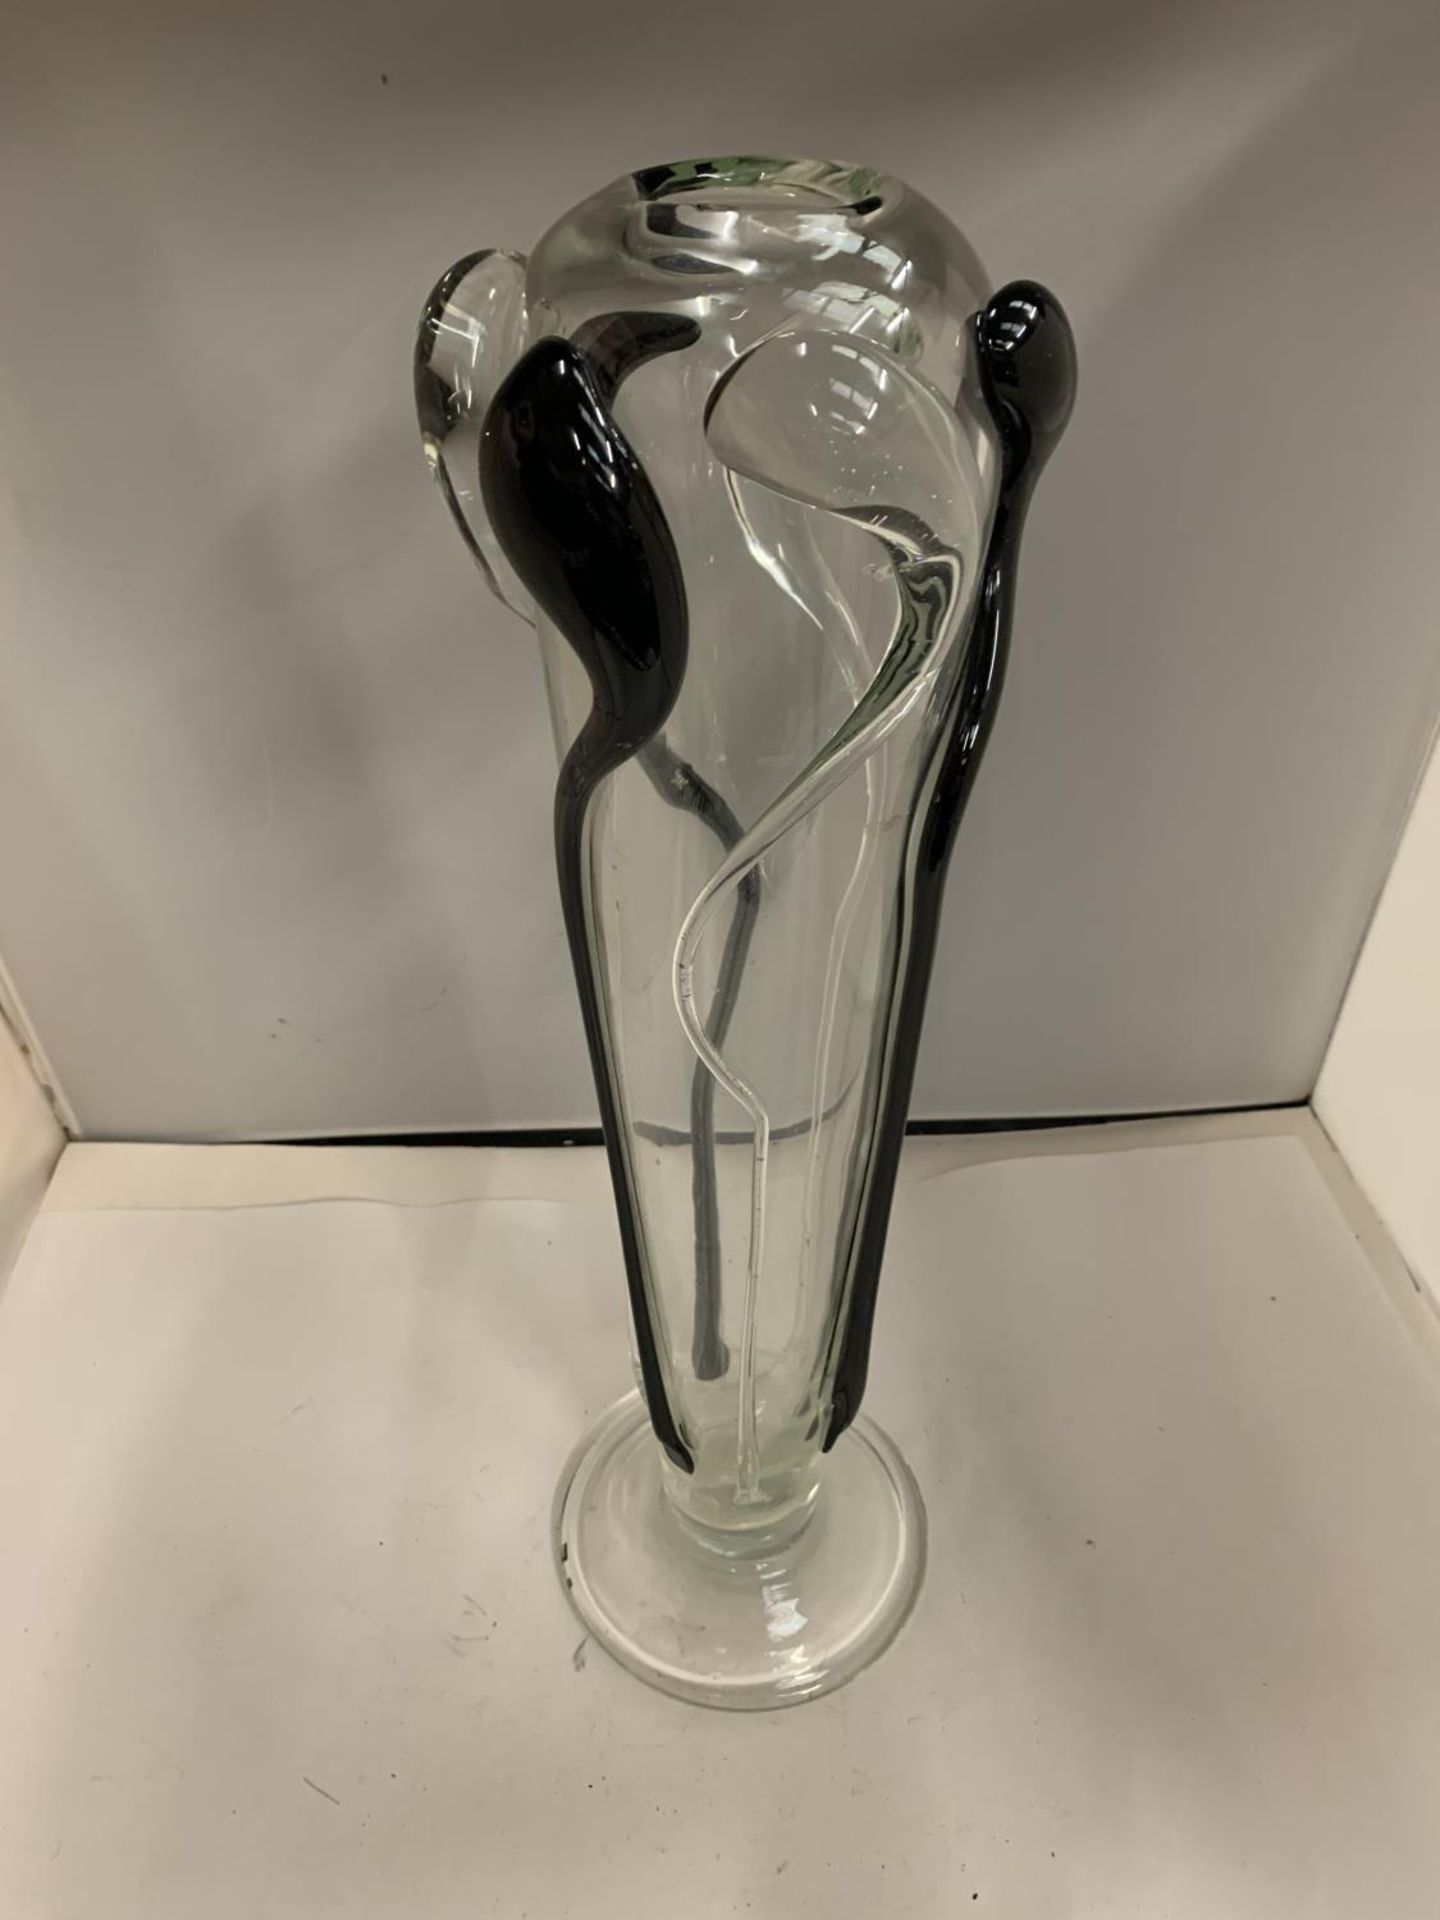 A HEAVY ART GLASS VASE HEIGHT 19 INCHES/45CM - Image 2 of 3